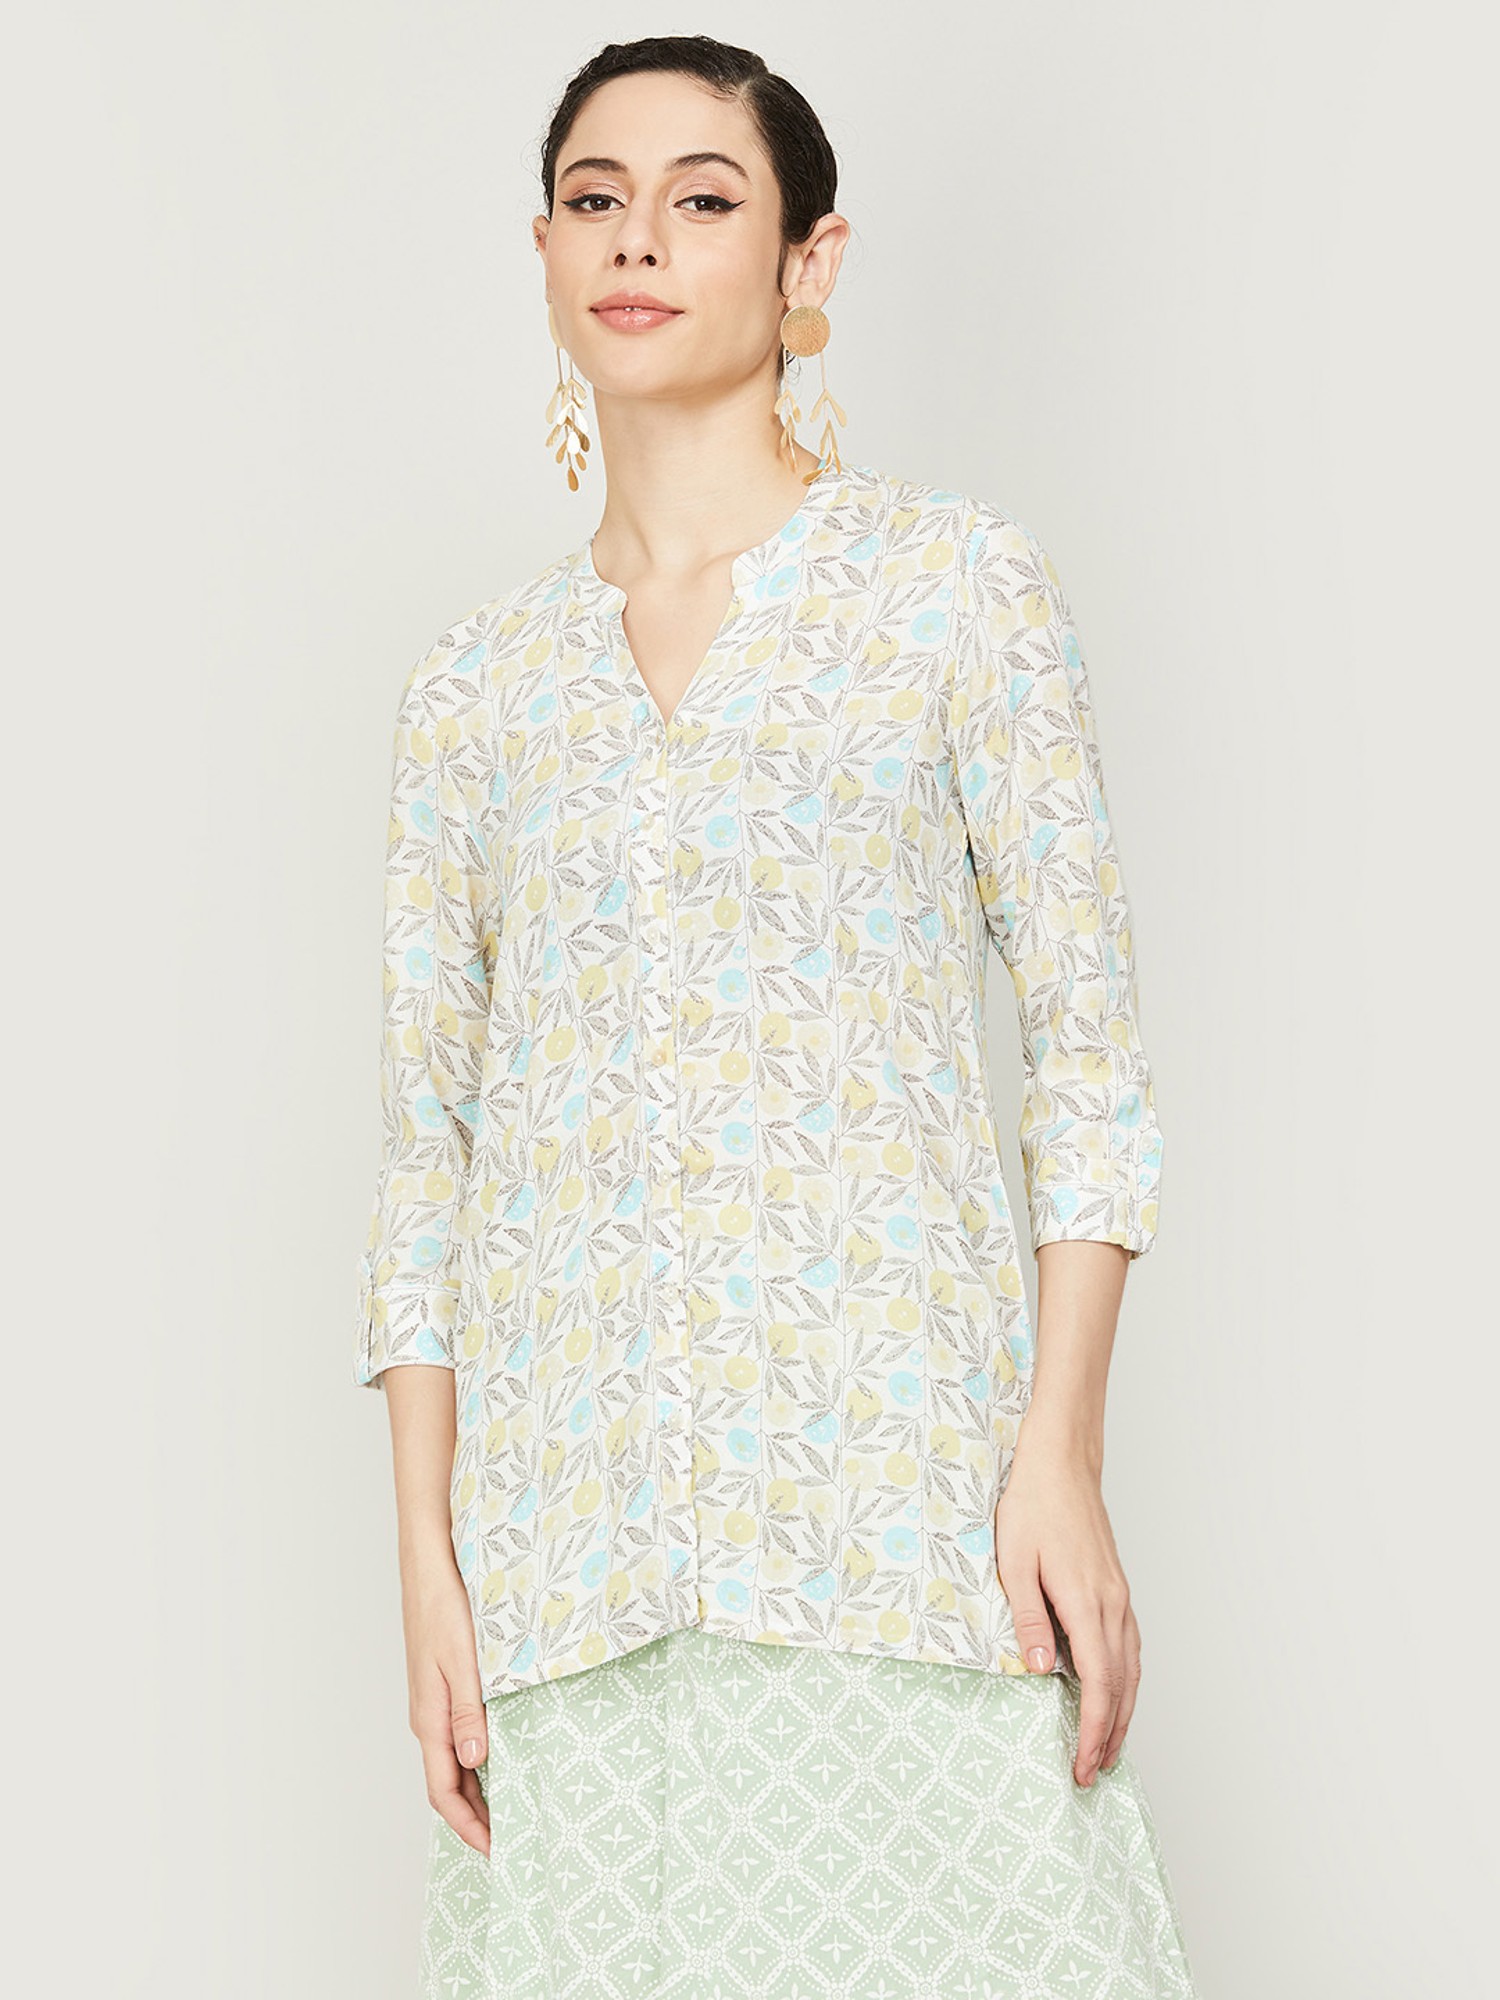 Buy Bombay Paisley Off White Floral Printed Off-Shoulder Dress from Westside